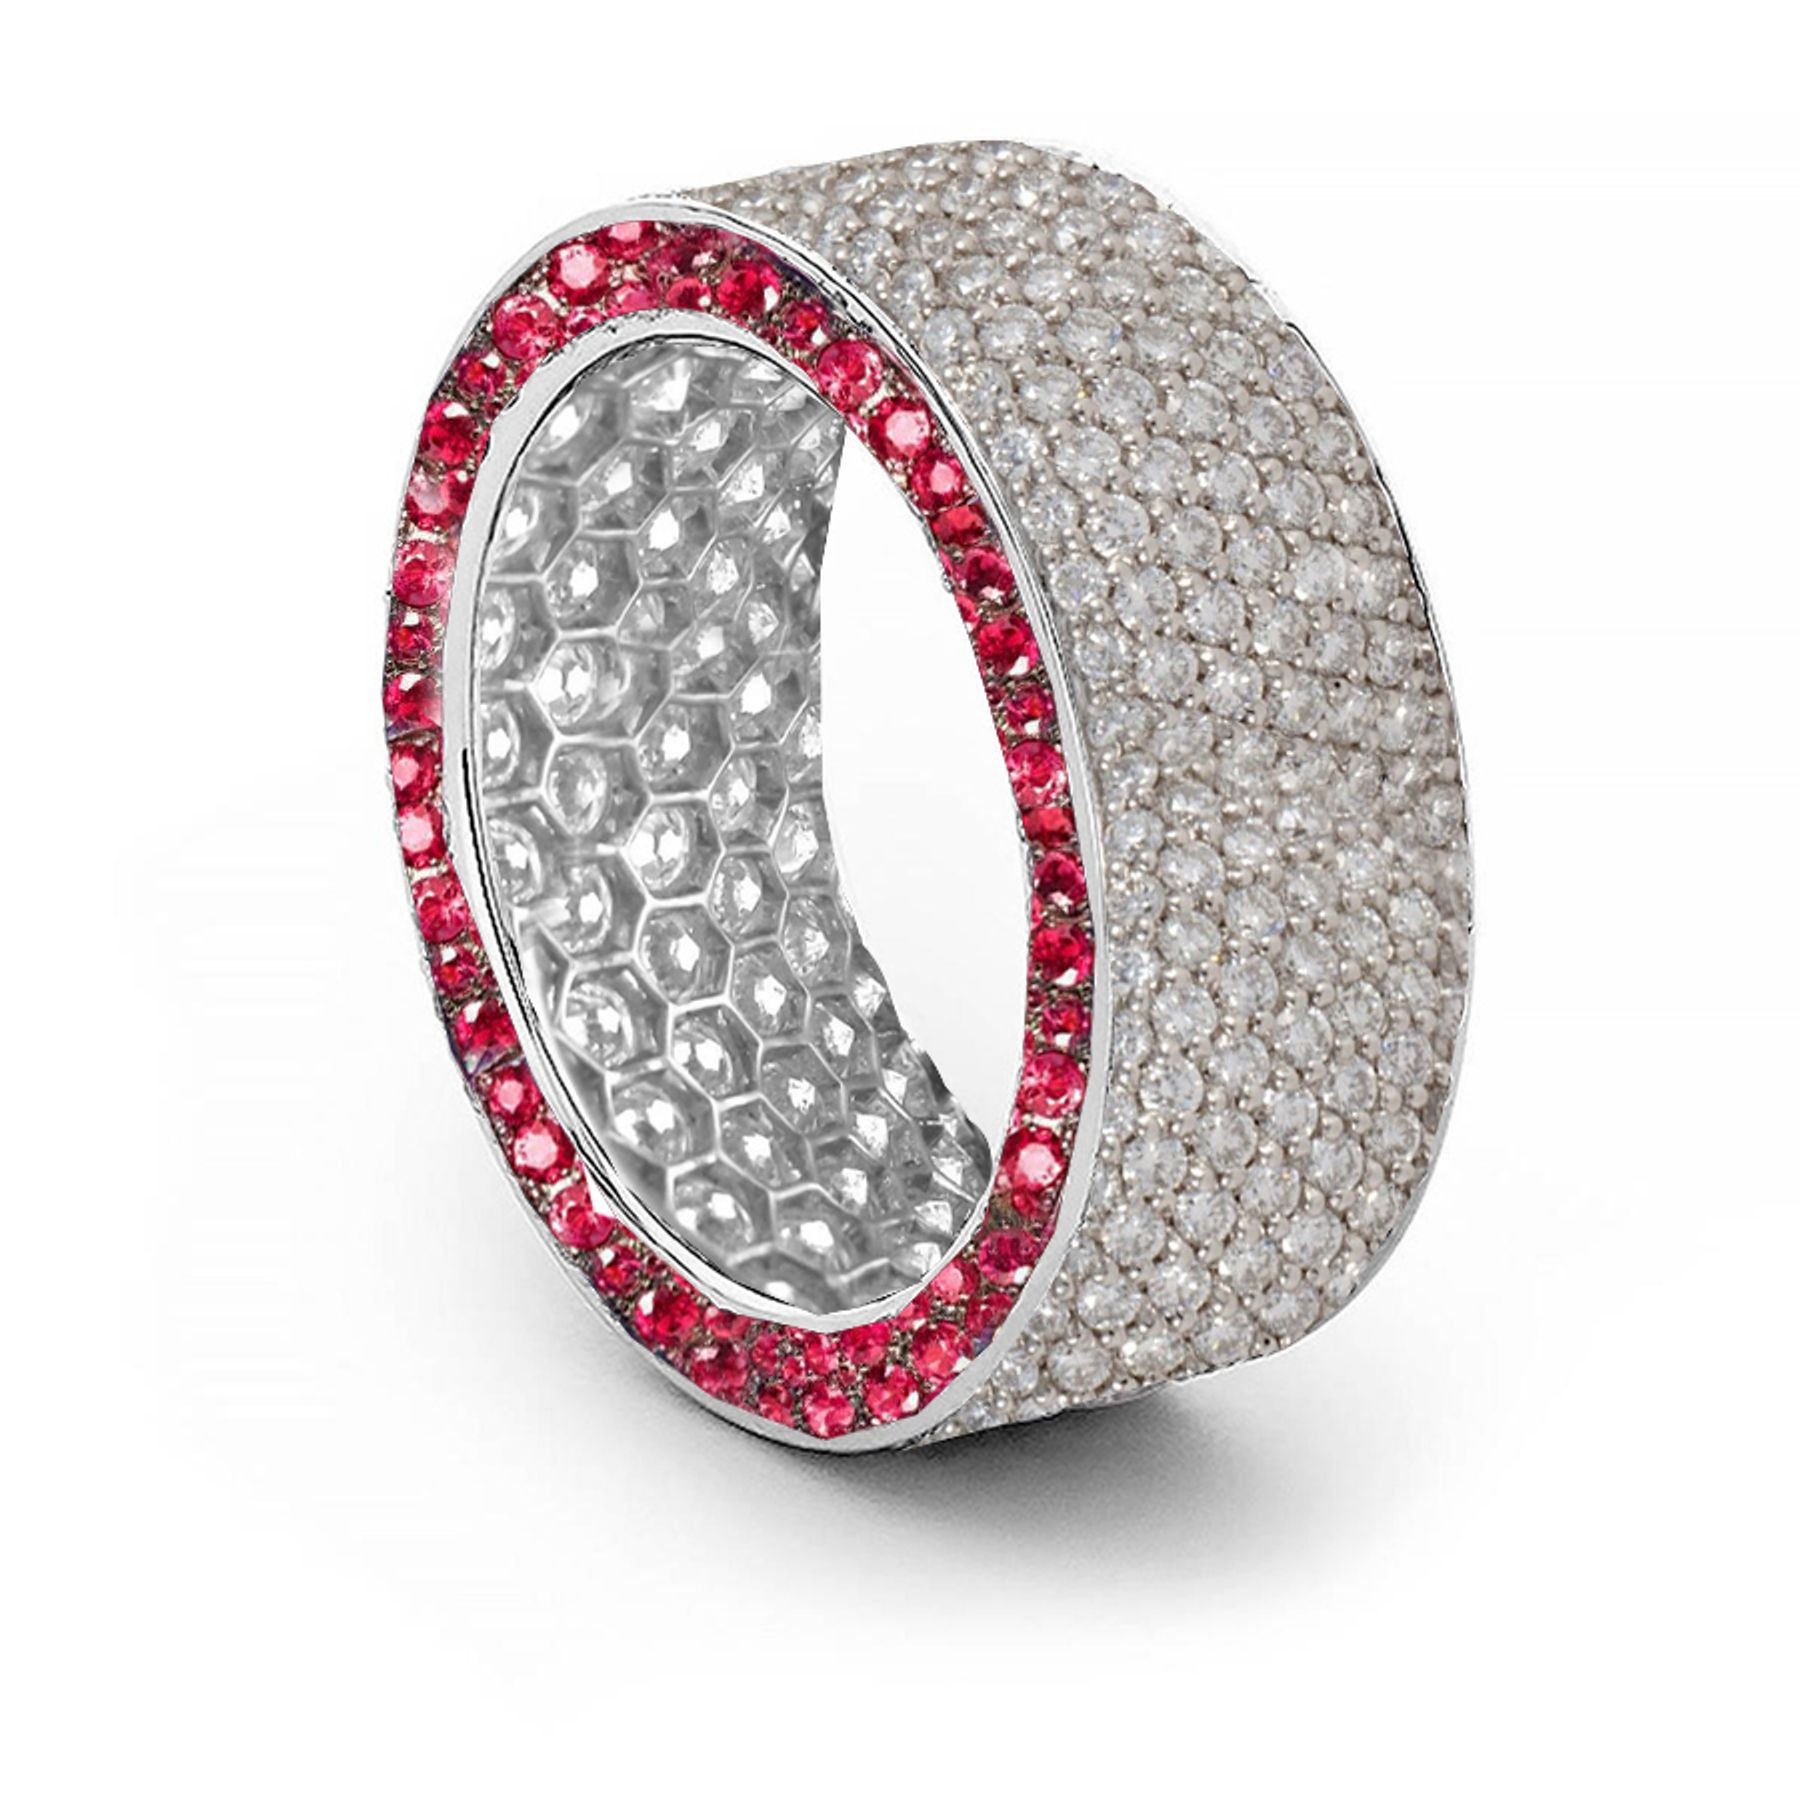 Shop Fine Quality Made To Order Round pave Set Diamond & Red Ruby Eternity Style Wedding & Anniversary Rings